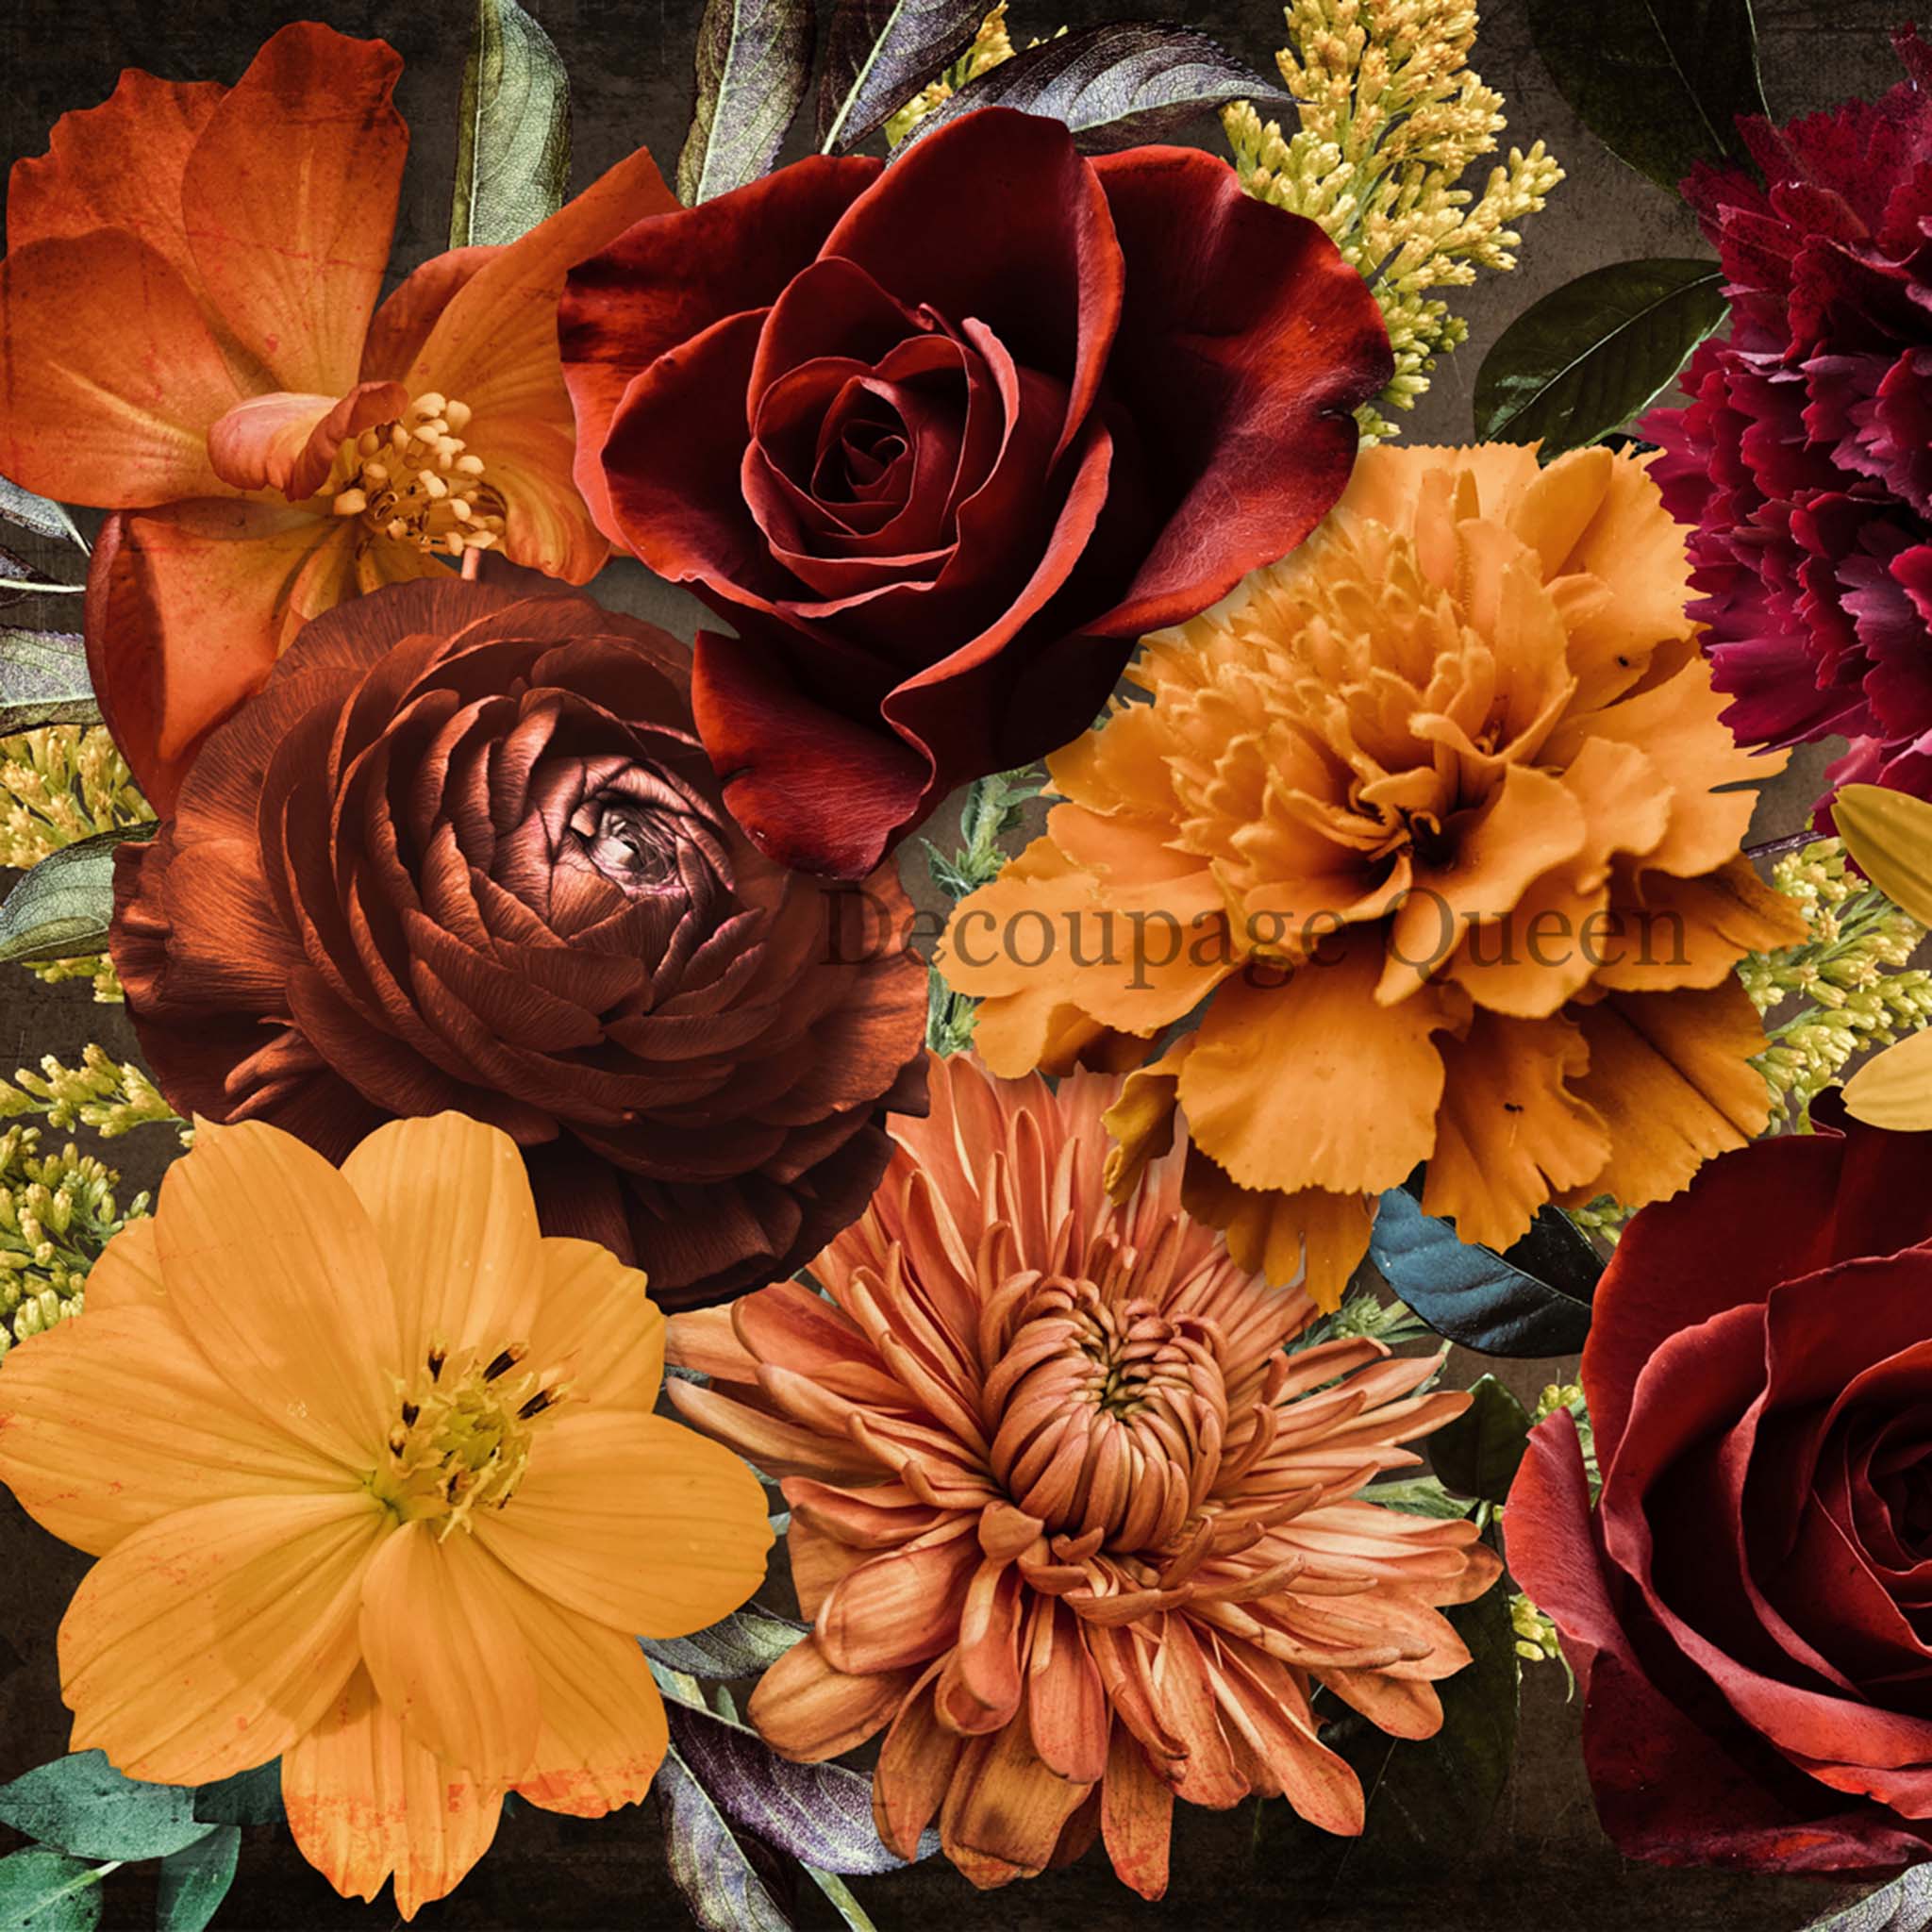 A2 rice paper design that features large burgundy, orange, and autumn colored flowers.